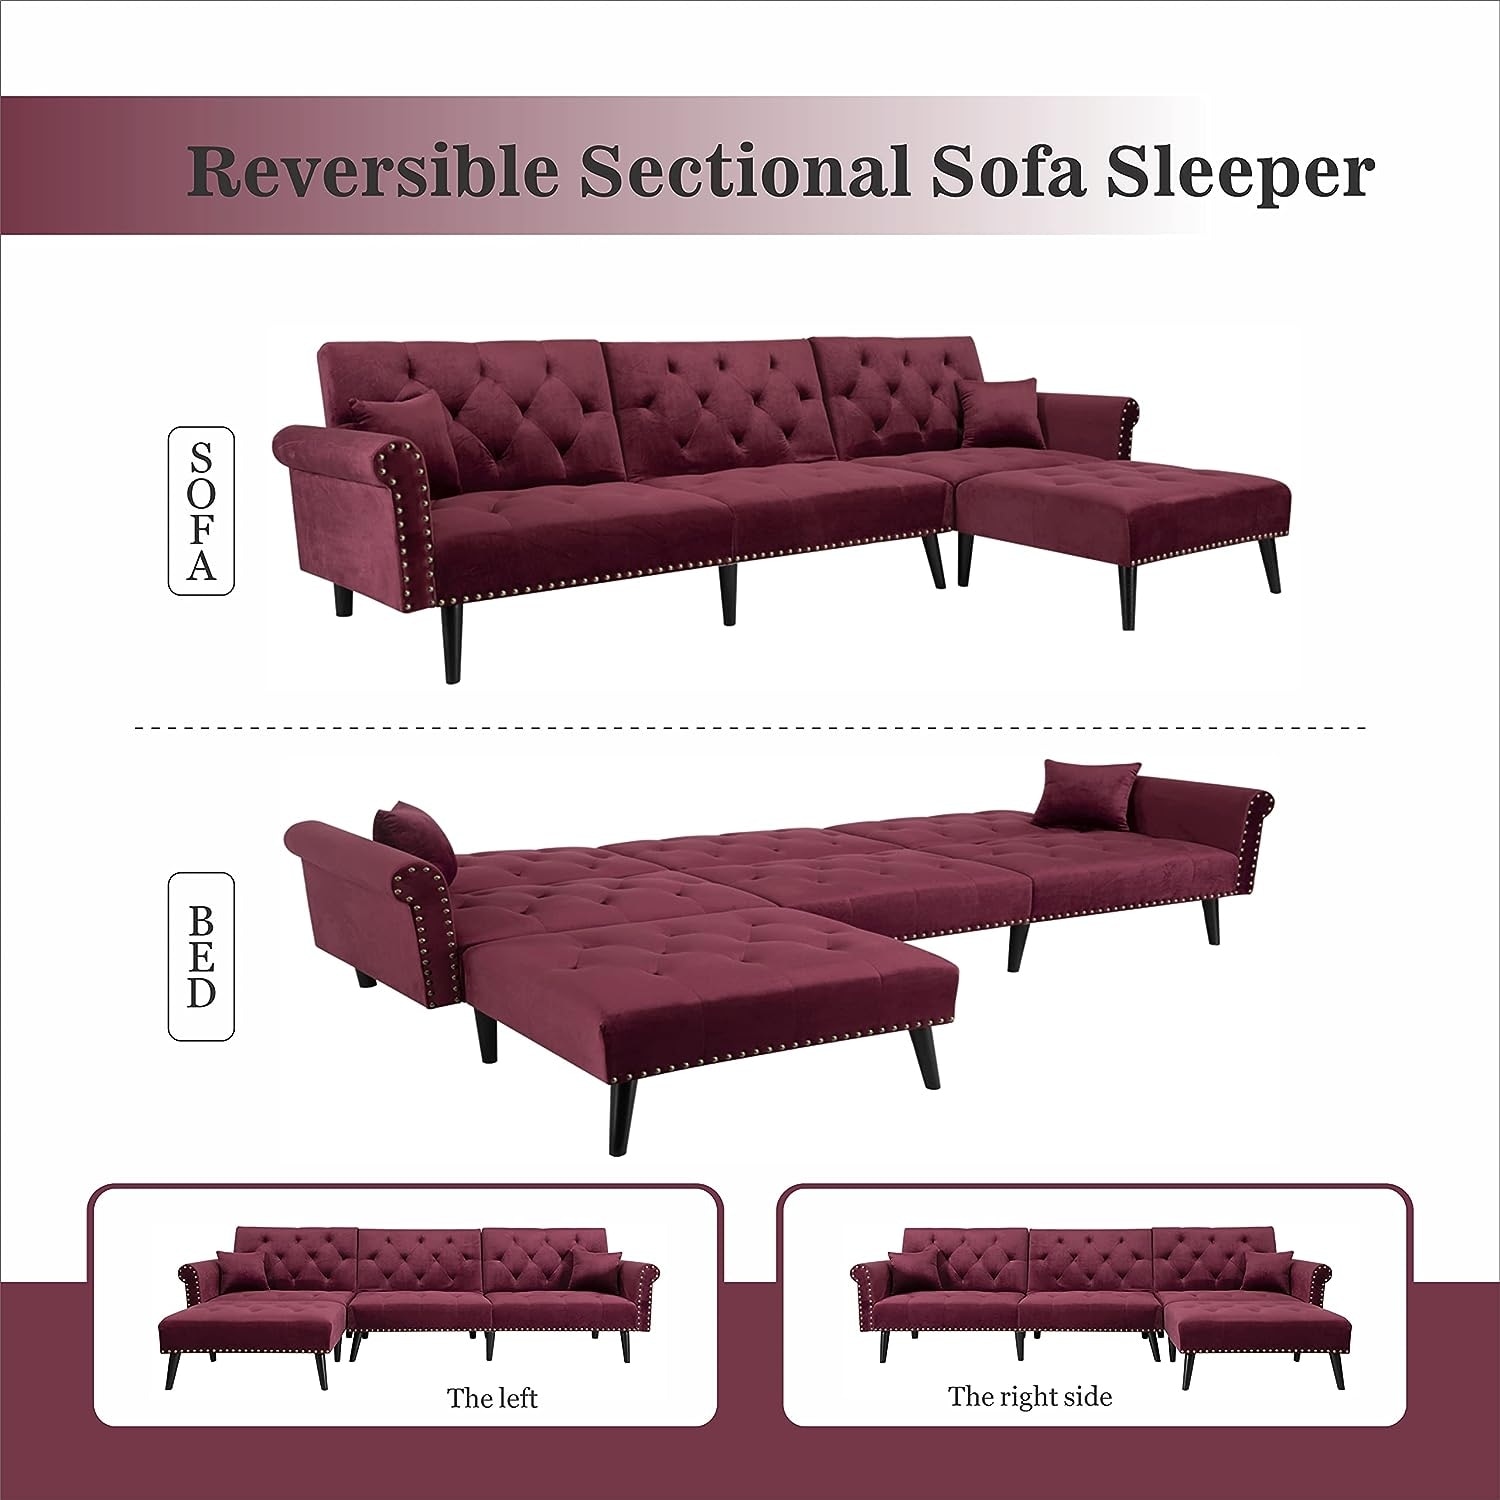 Velvet Convertible Sleeper Sofa Bed L-shape Reversible Sectional Couch Set for Living Room Sofa Set with Nailheads Arms